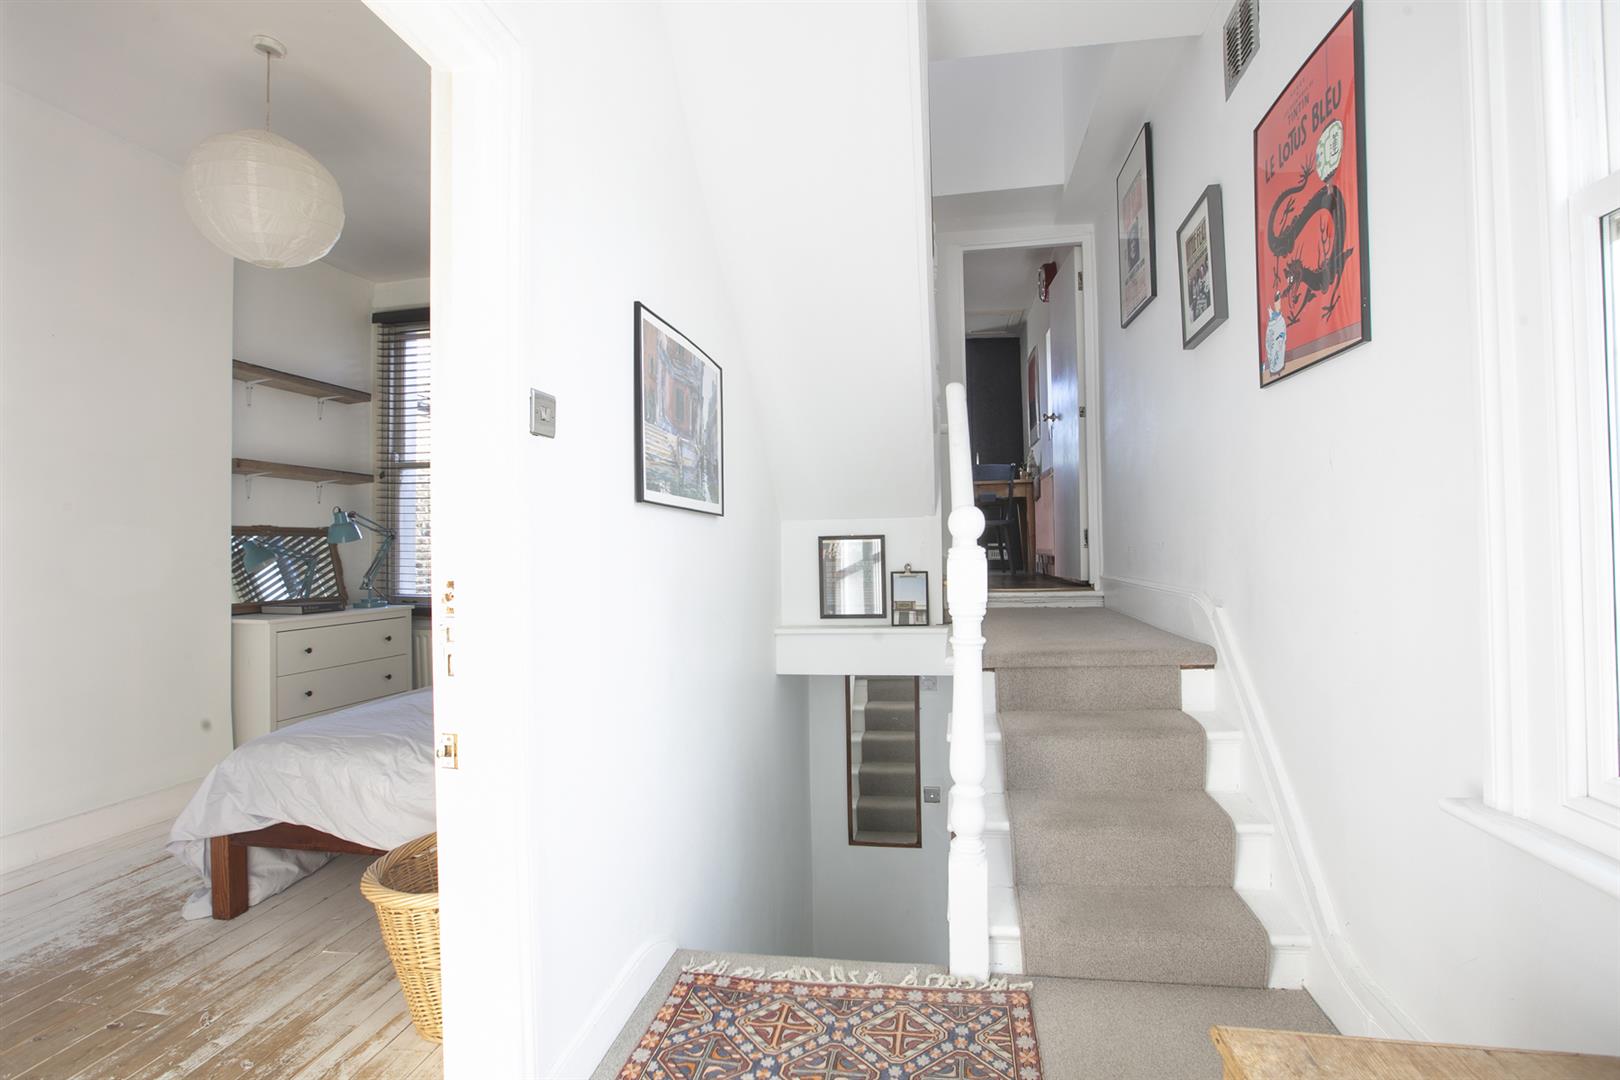 Flat - Conversion For Sale in Shenley Road, London, SE5 782 view11